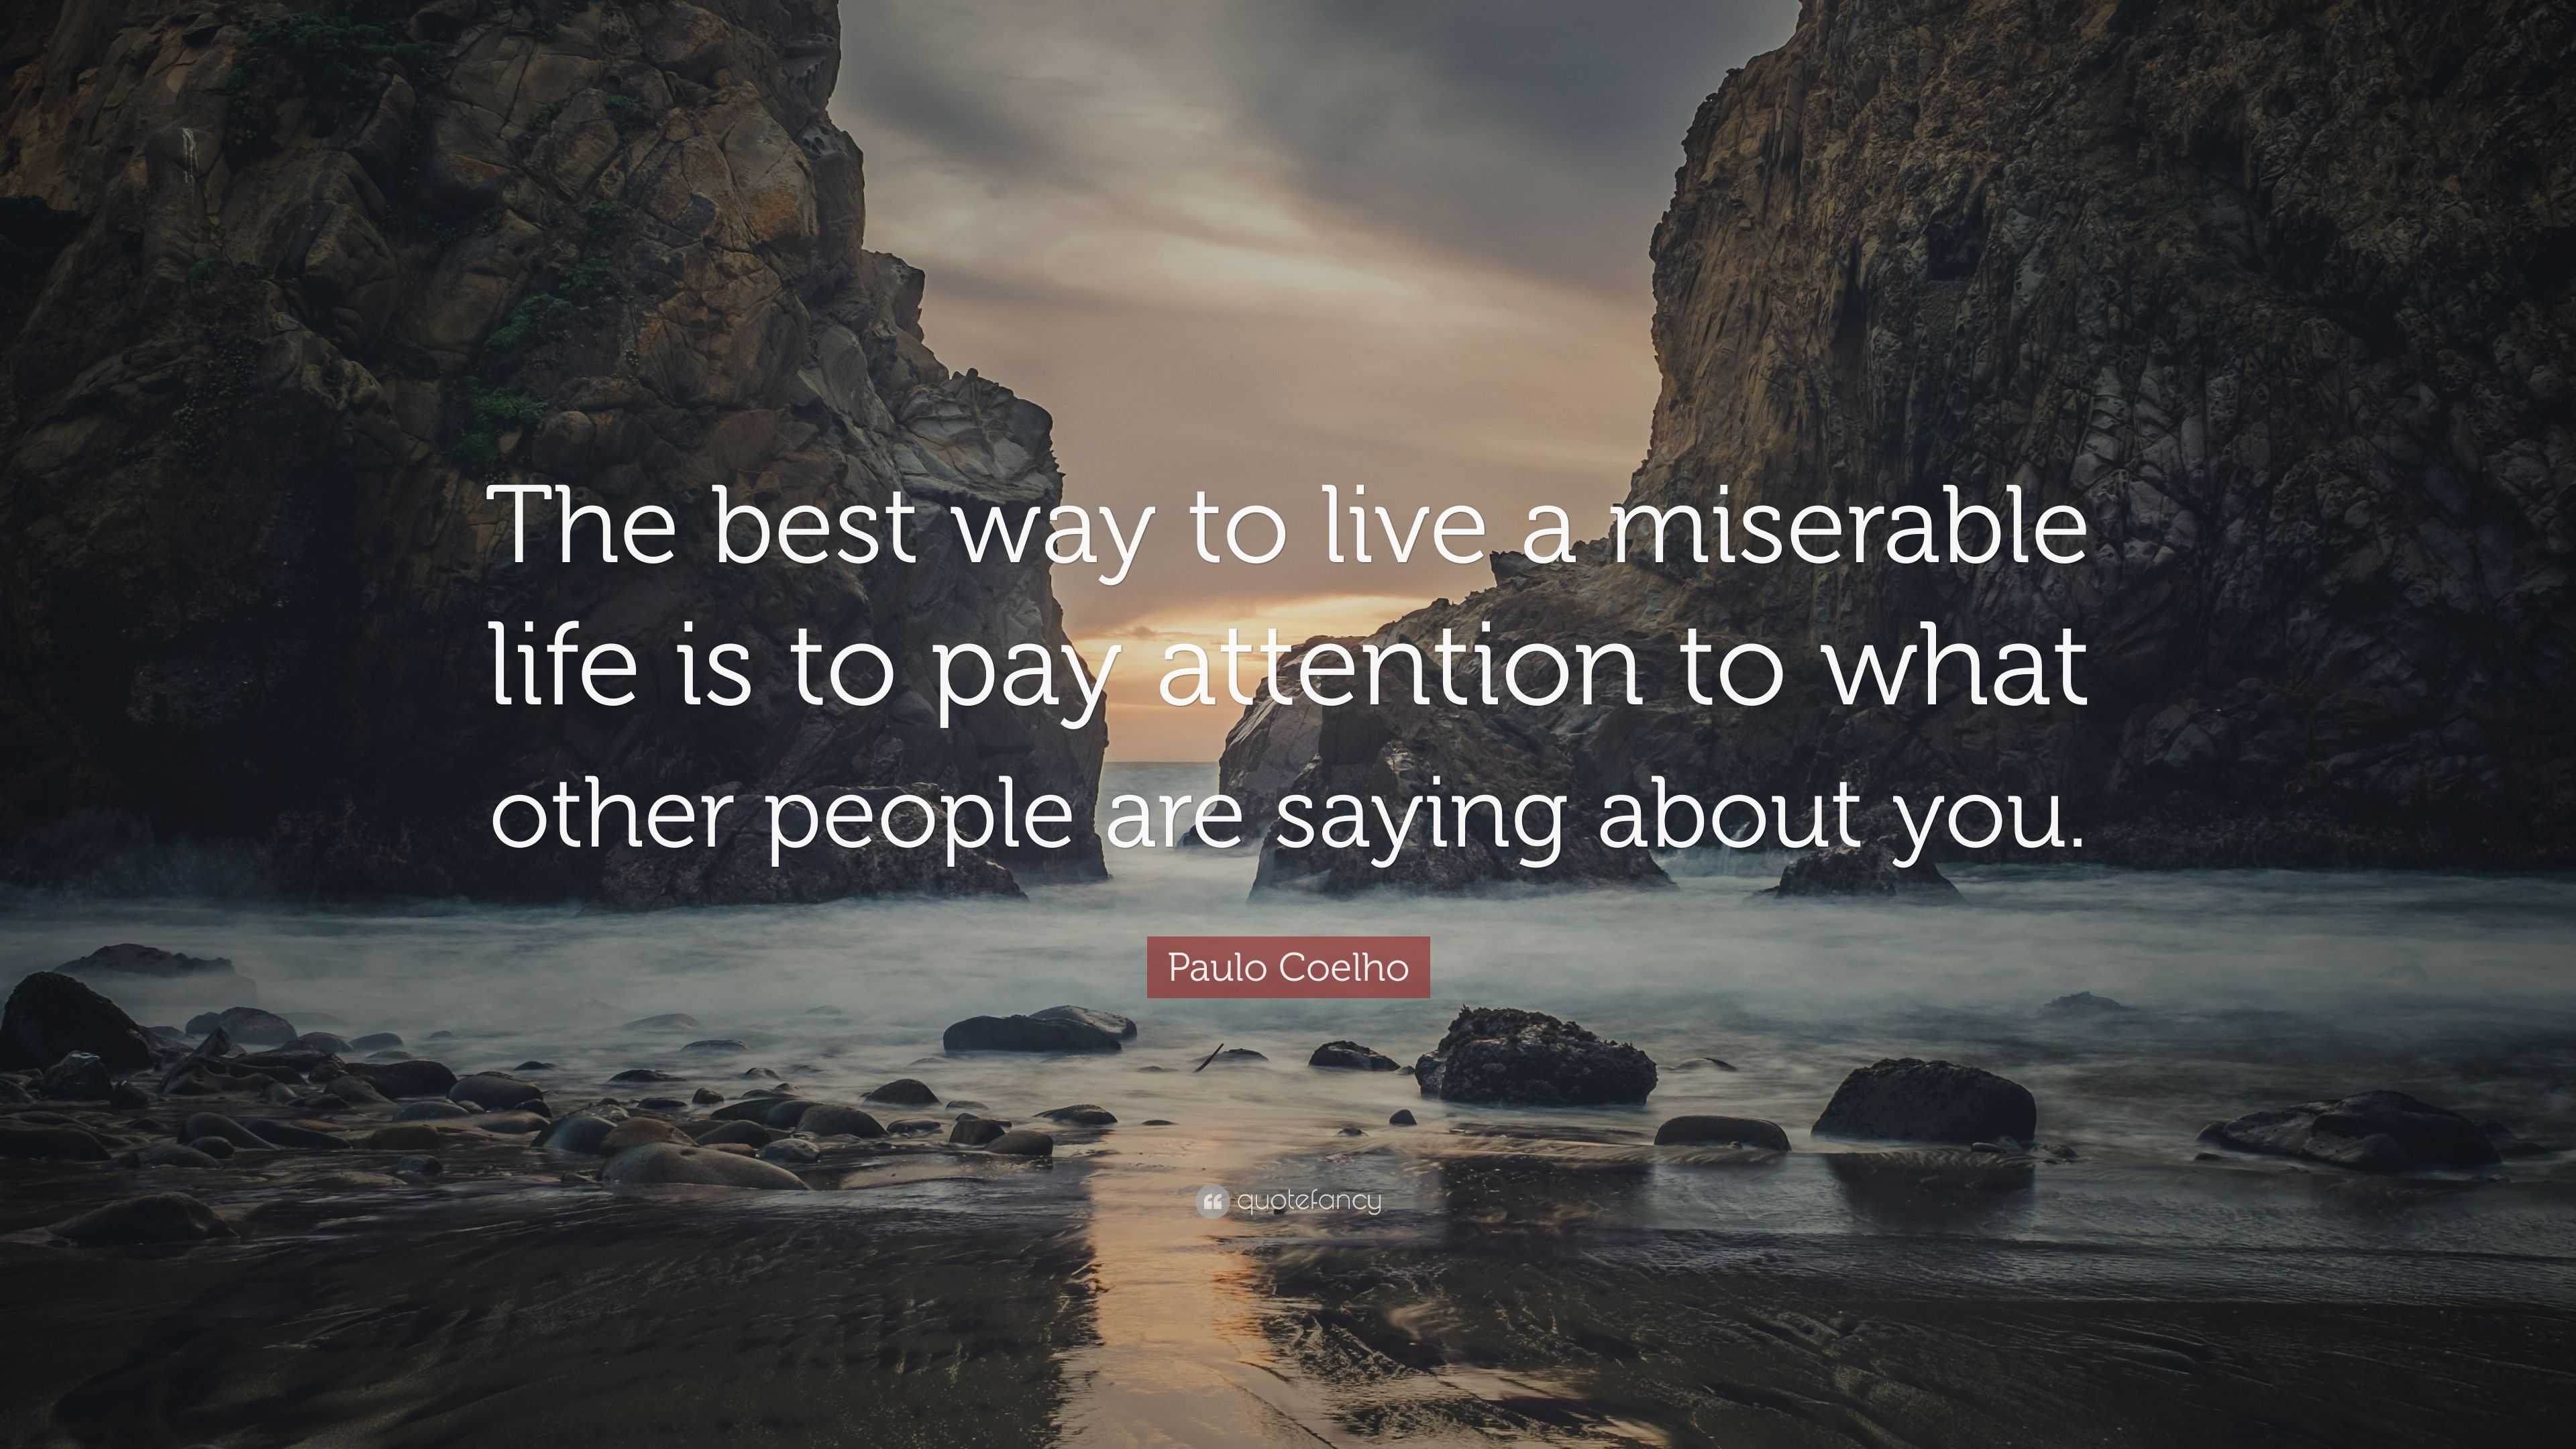 Paulo Coelho Quote: "The best way to live a miserable life is to pay attention to what other ...